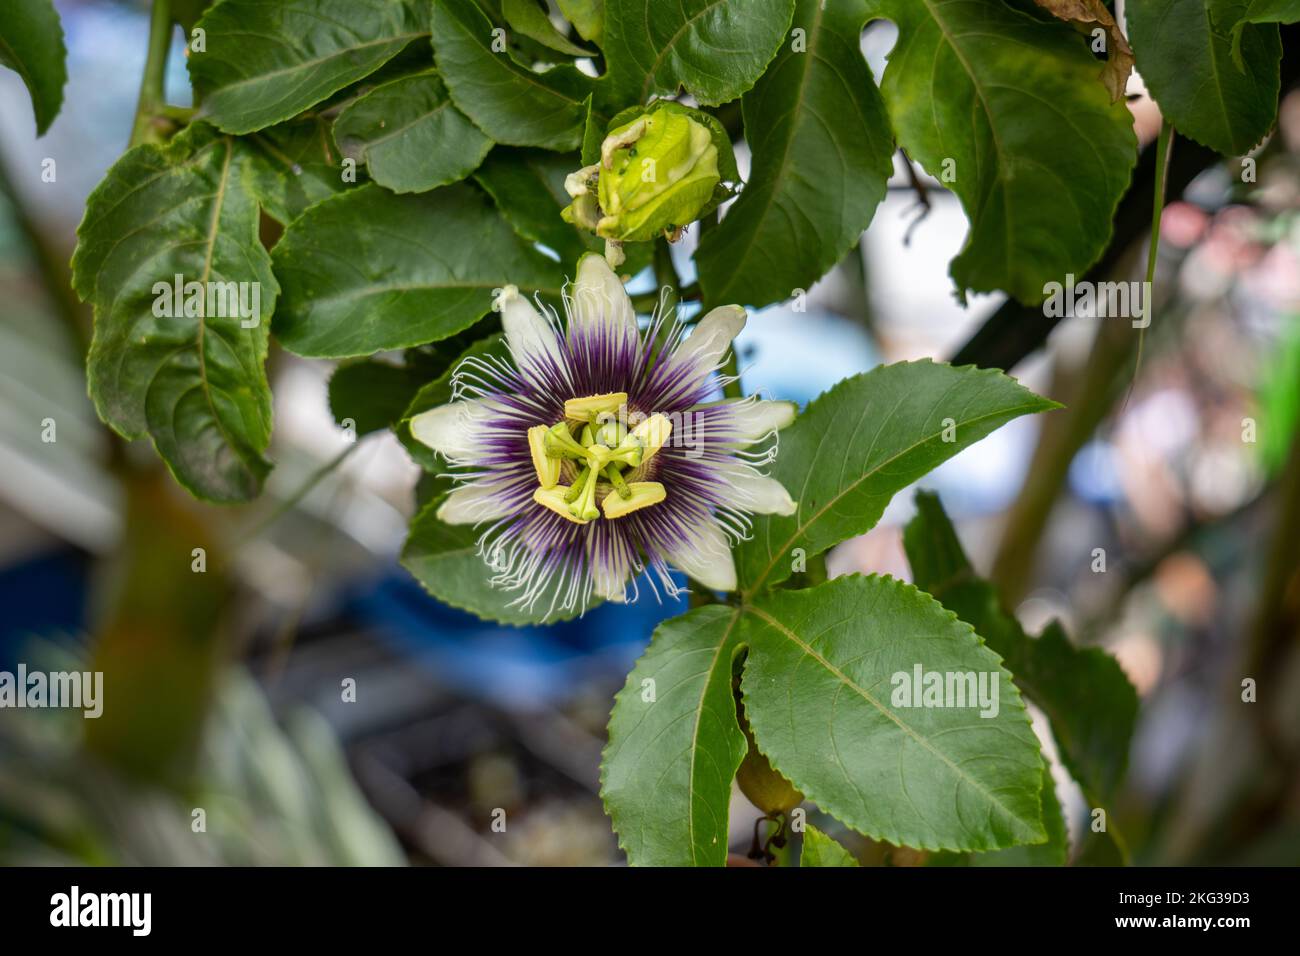 Passion Fruit Flower (Passiflora edulis), a Vine Species Hanging on a Branch Close Up Stock Photo